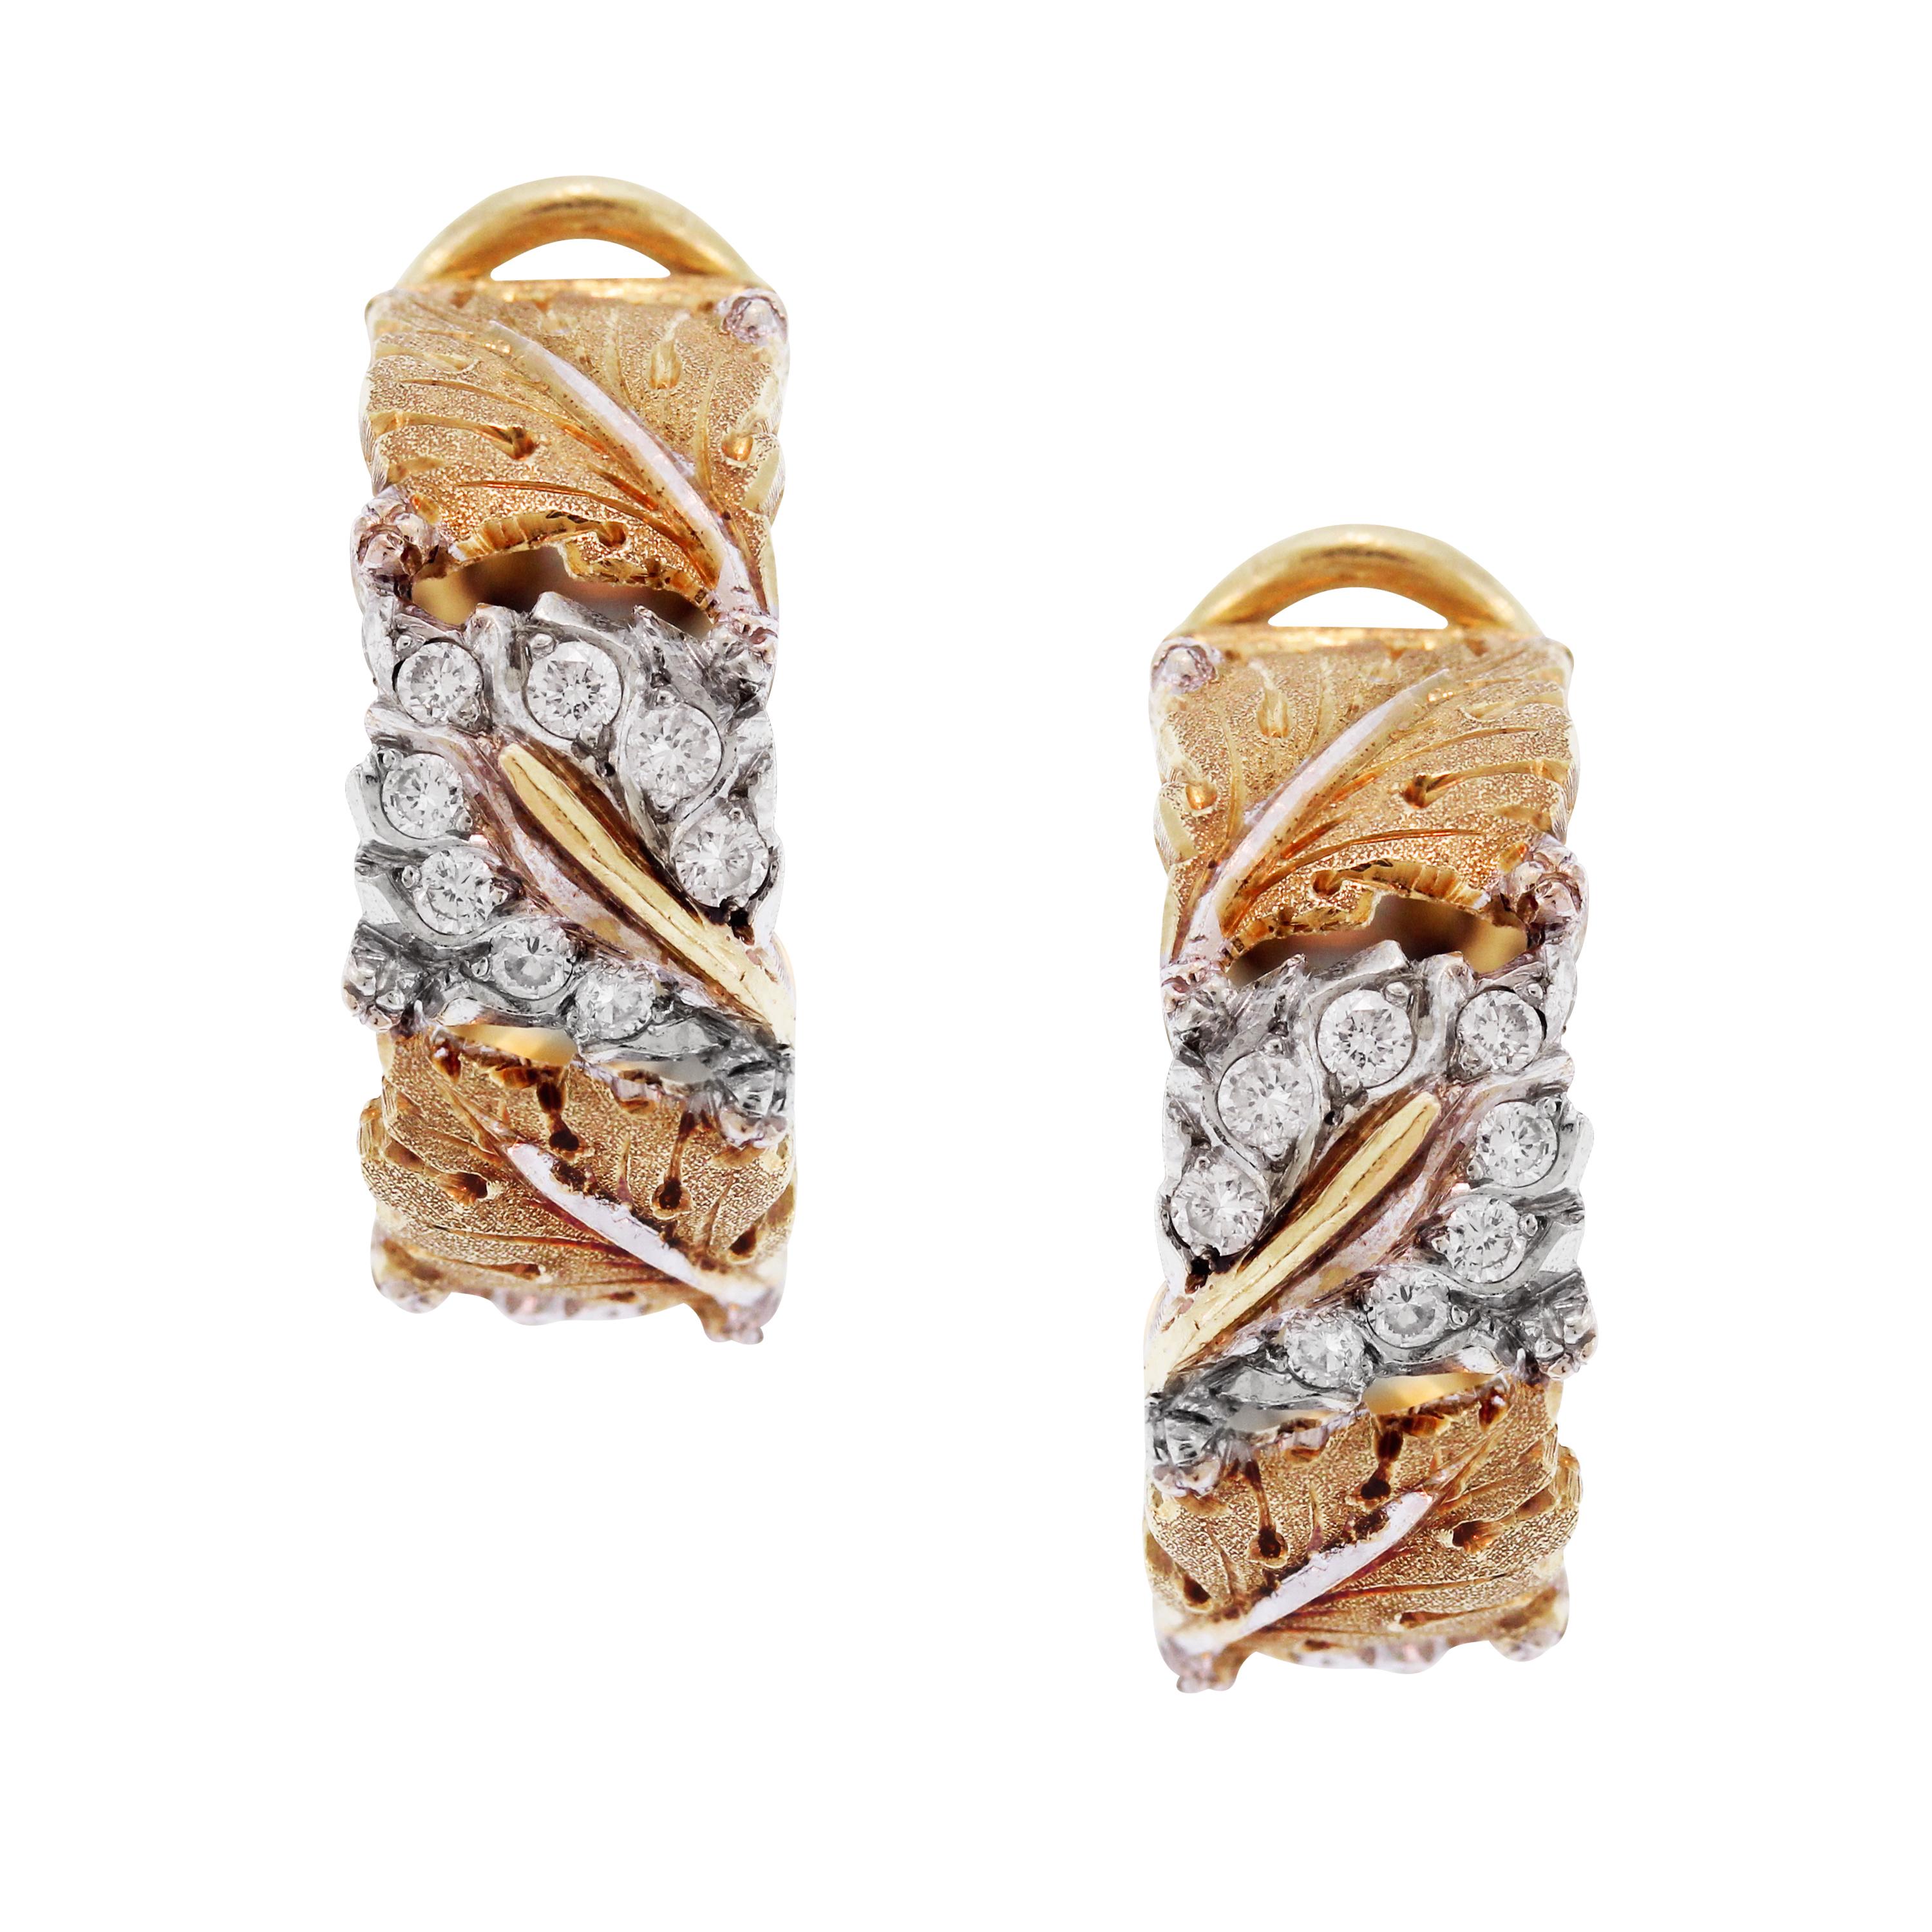 Buccellati 18K Yellow White Gold Diamond Floral Hoop Earrings

This stunning pair of earrings by world renowned designer, Buccellati feature incredible workmanship and beautifully done floral design

0.32 carat G color, VS clarity white